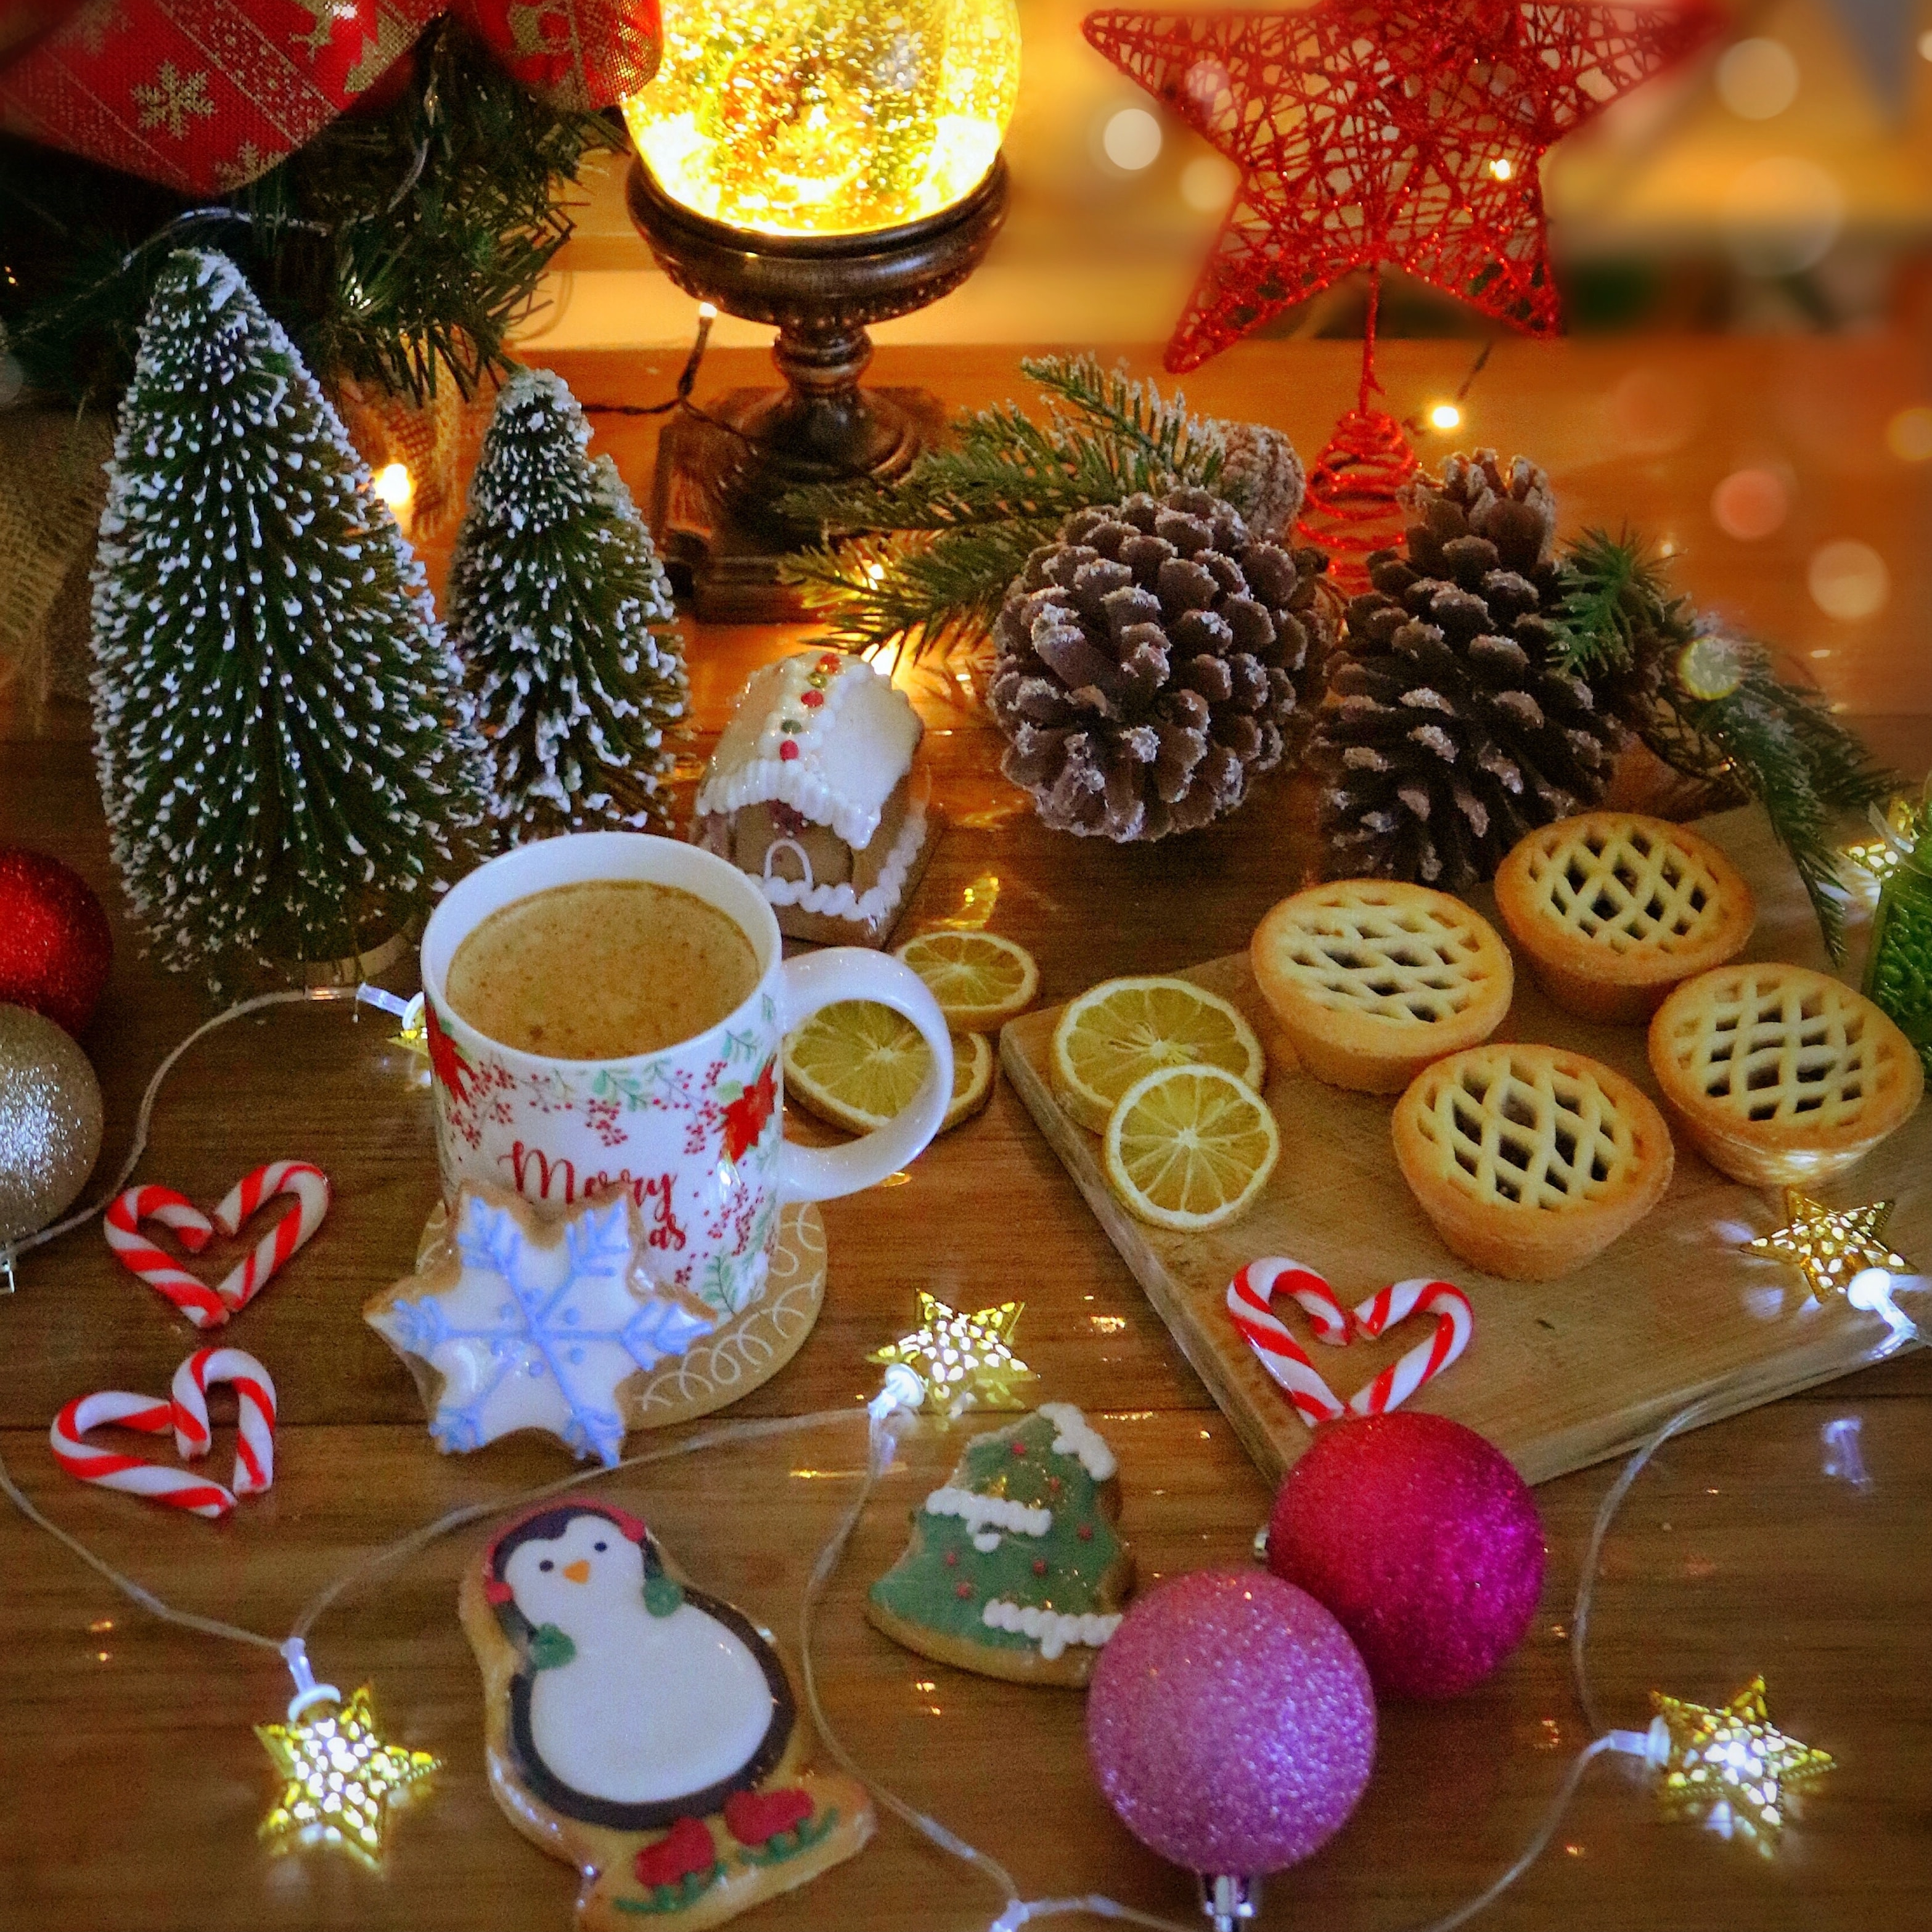 Mince pies, hot chocolate and Christmas decorations